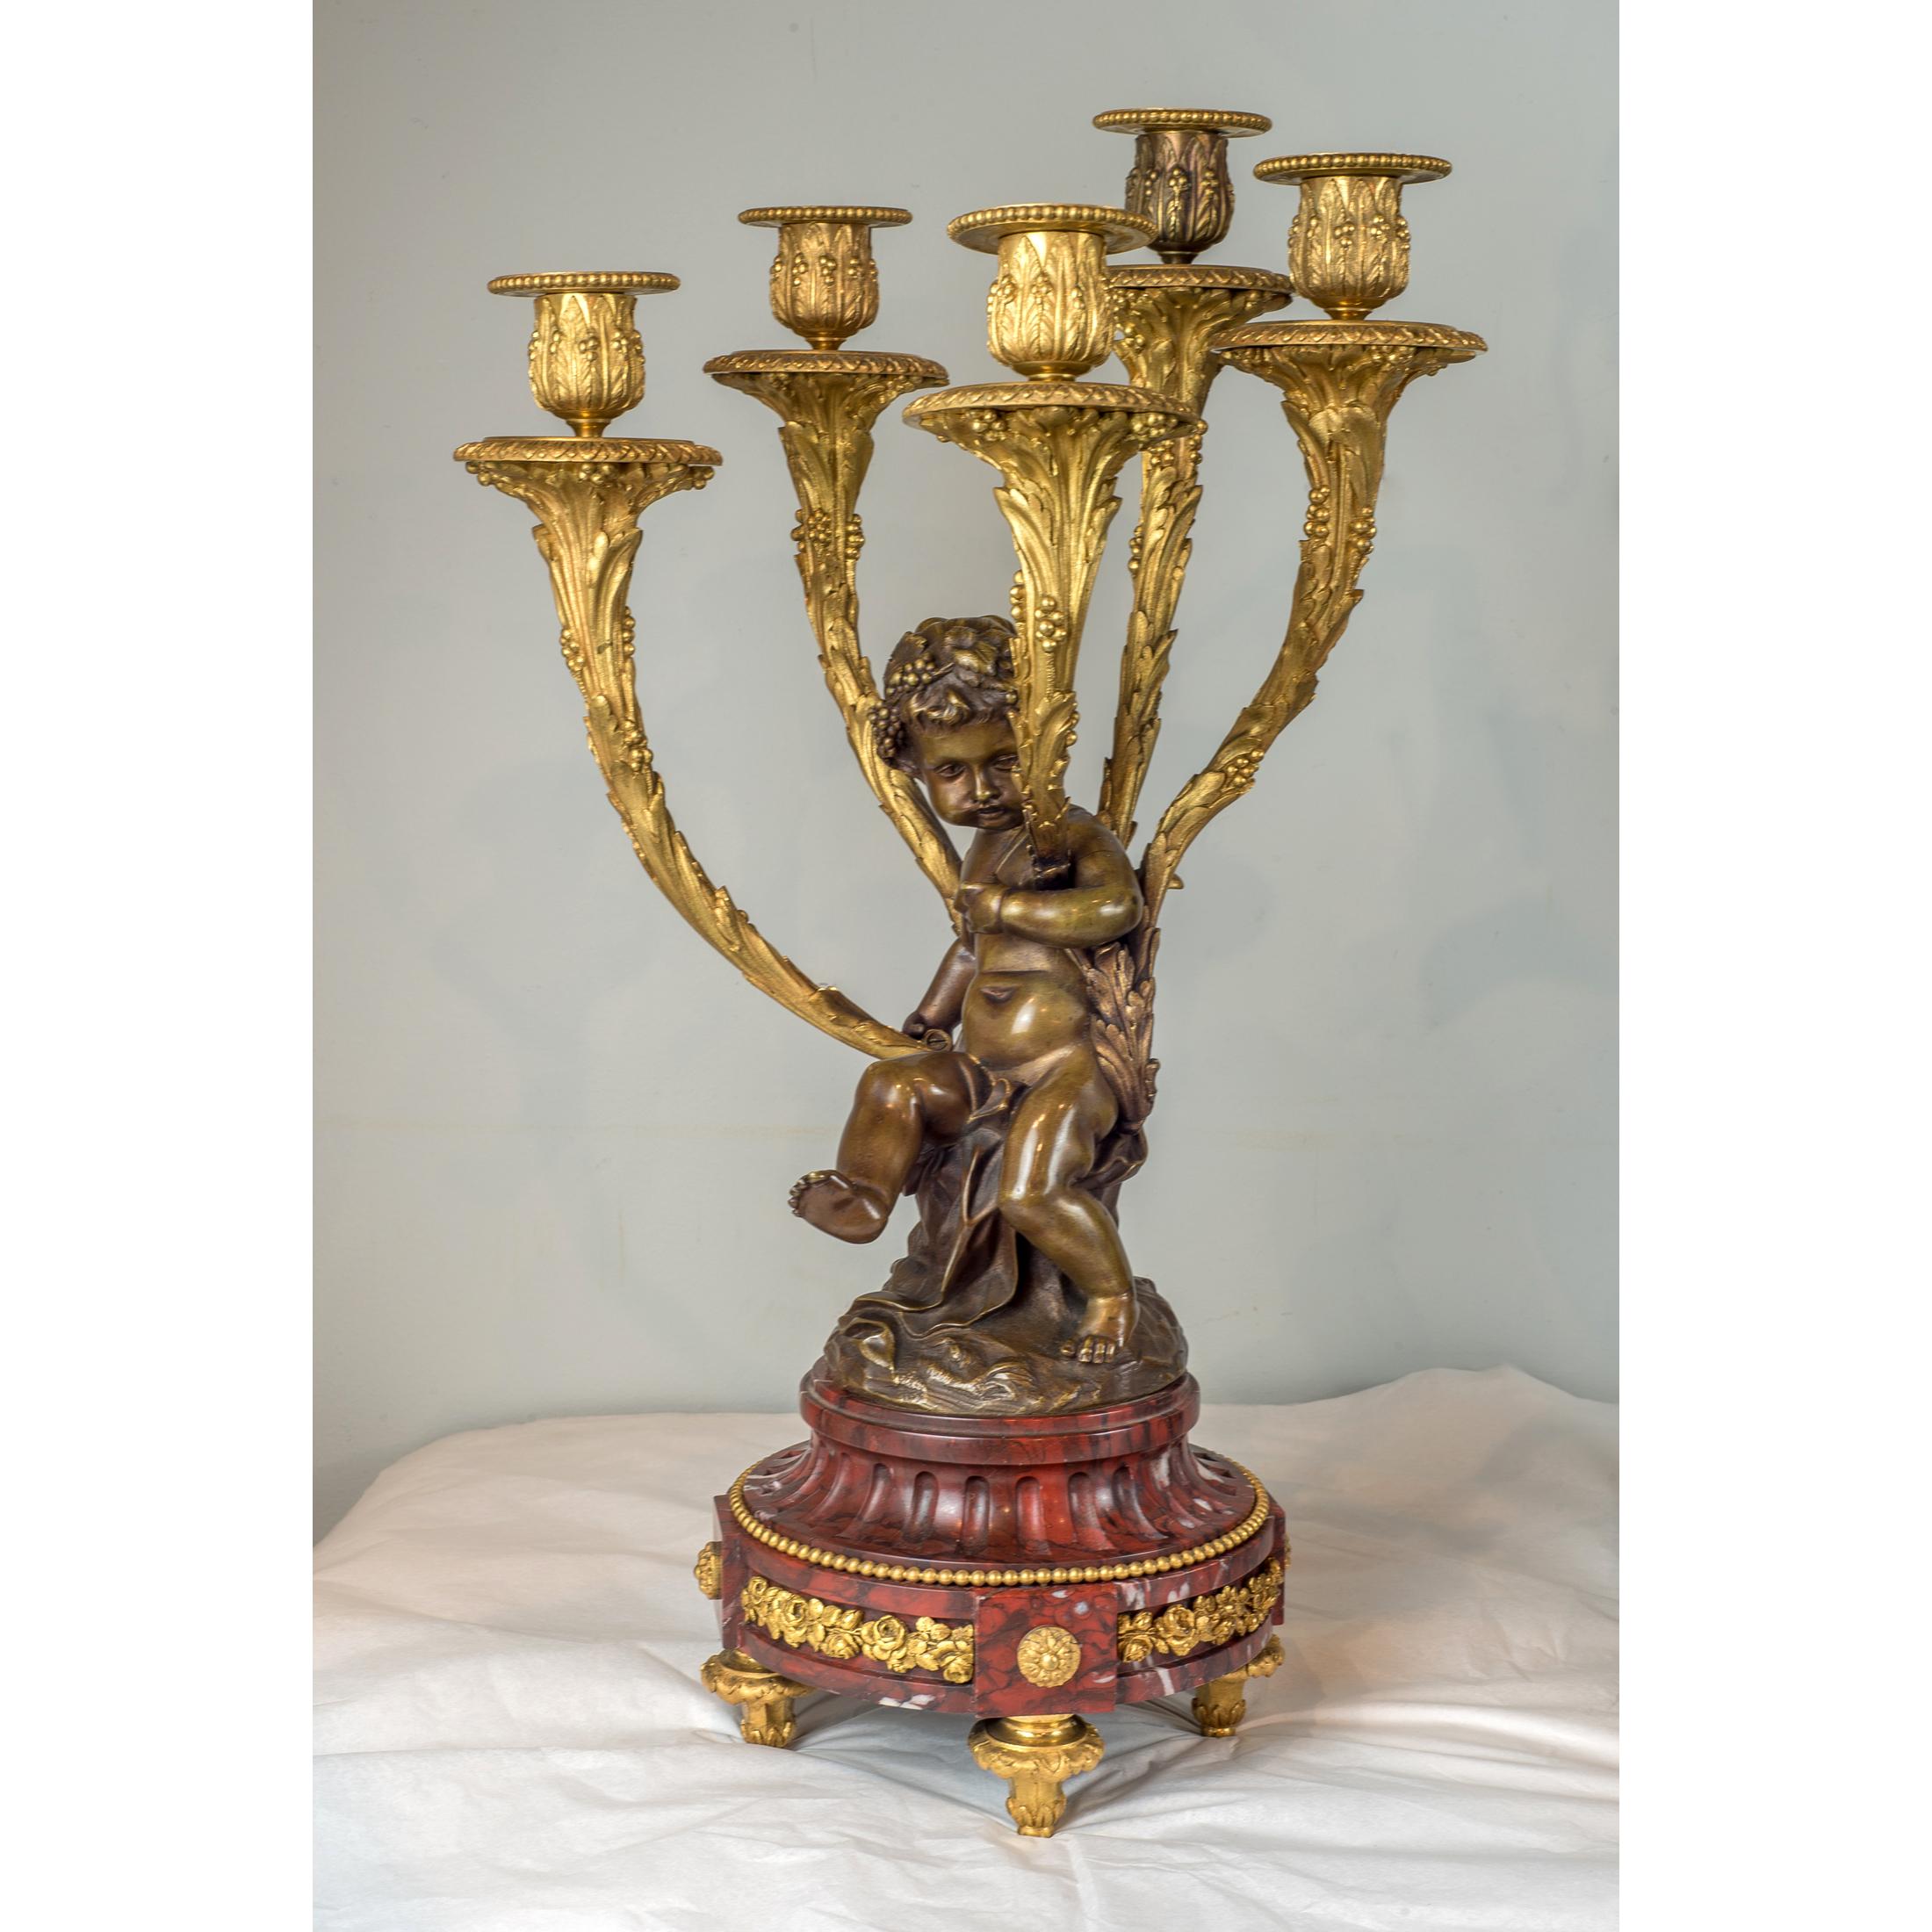 19th Century Patinated Bronze Sculpture of Cupid and Psyche Clockset by Bouguereau For Sale